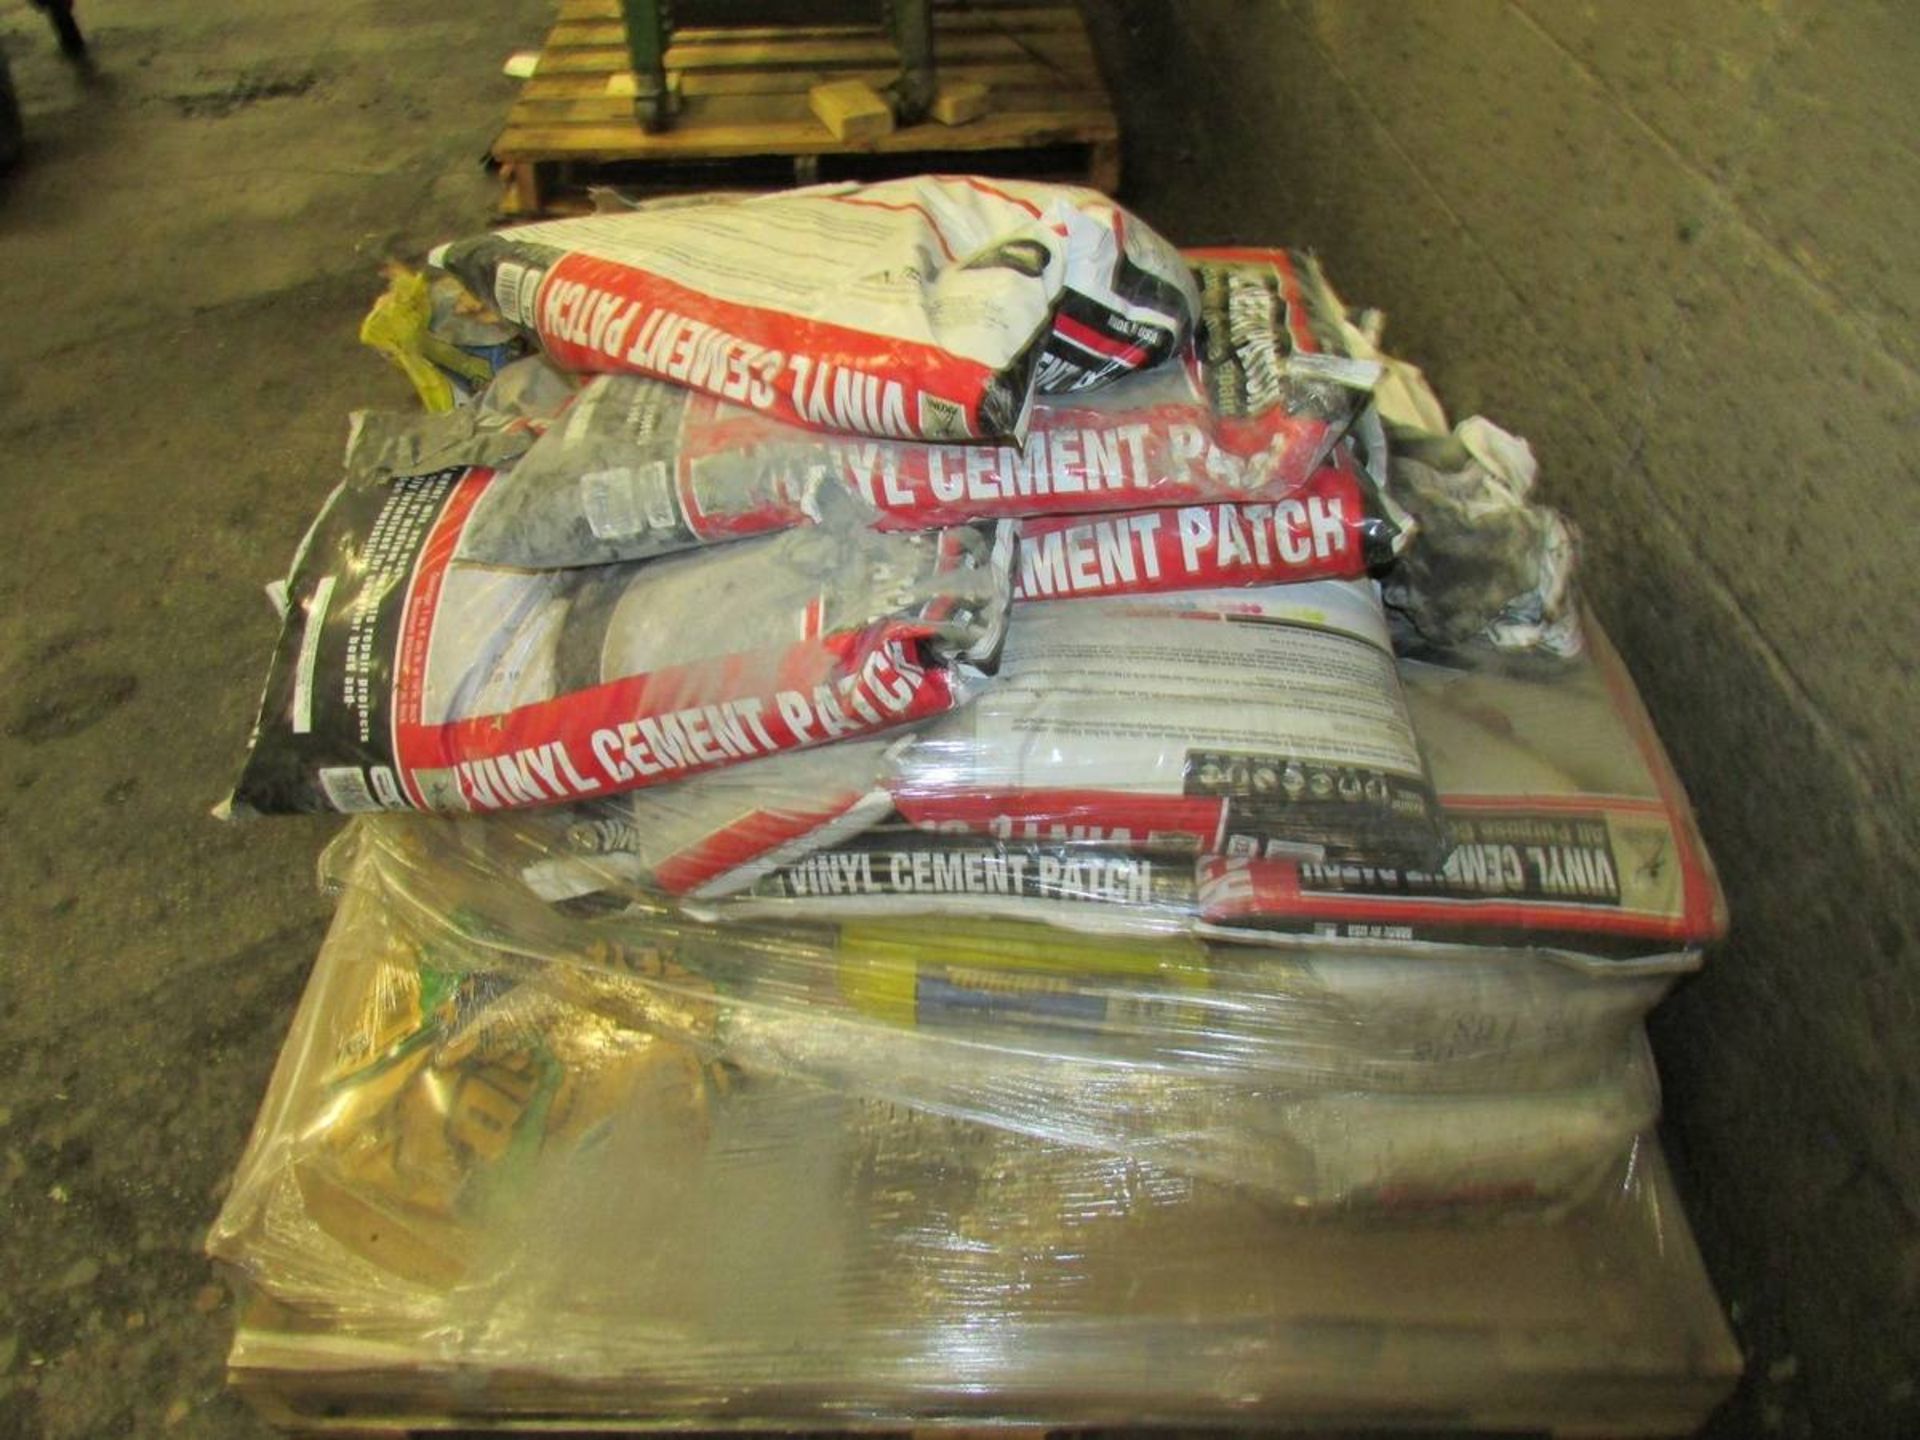 Pallet of Vinyl Cement Patches and Quikrete Bags - Image 2 of 3